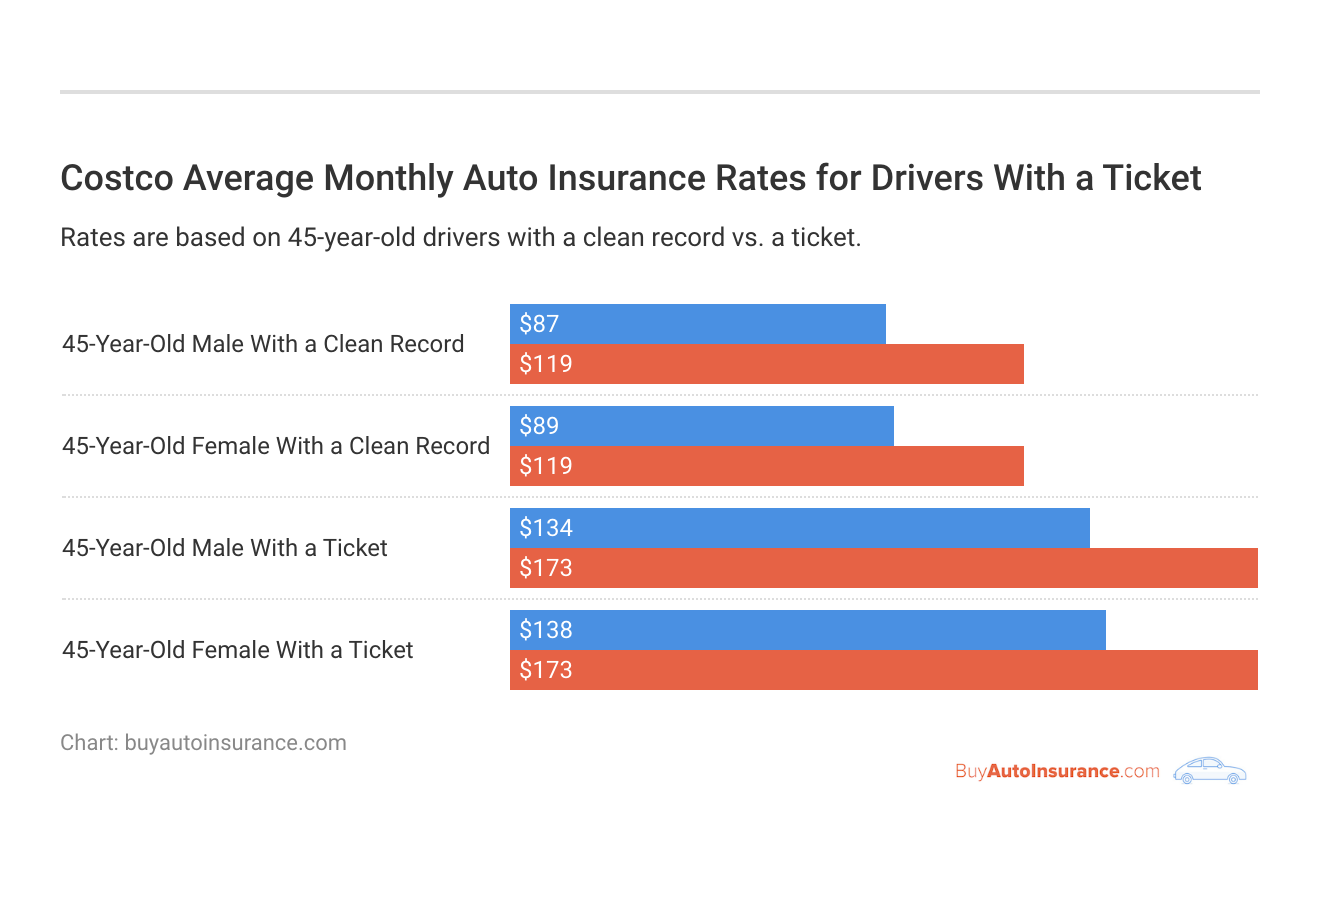 <h3>Costco Average Monthly Auto Insurance Rates for Drivers With a Ticket</h3>